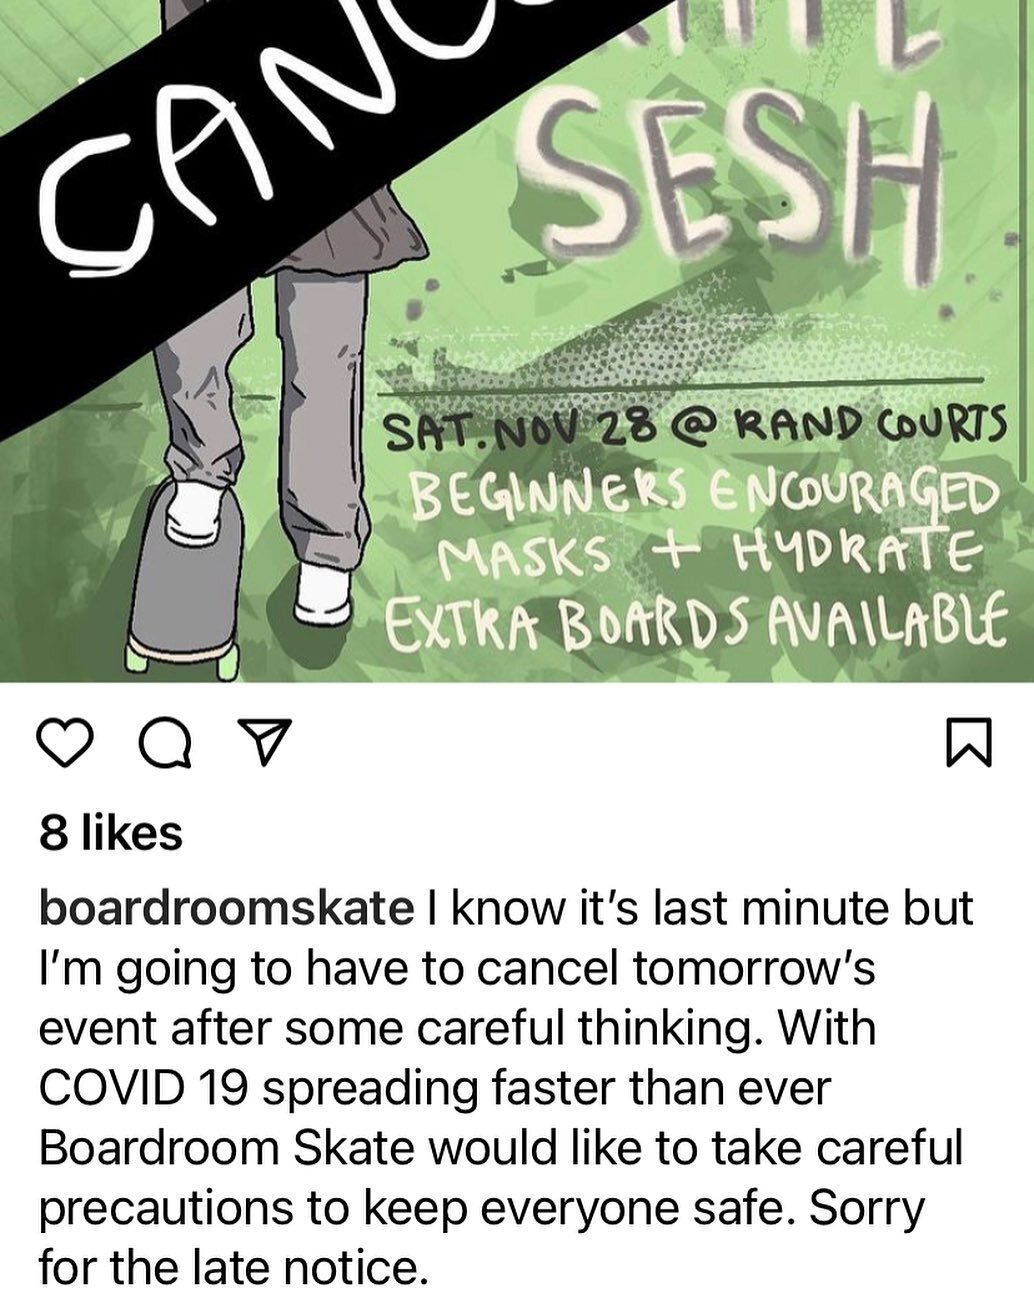 Cancelled for tomorrow / trying to be cautious and keep everyone safe. @boardroomskate  @mhs_skateclub @courtskatepark